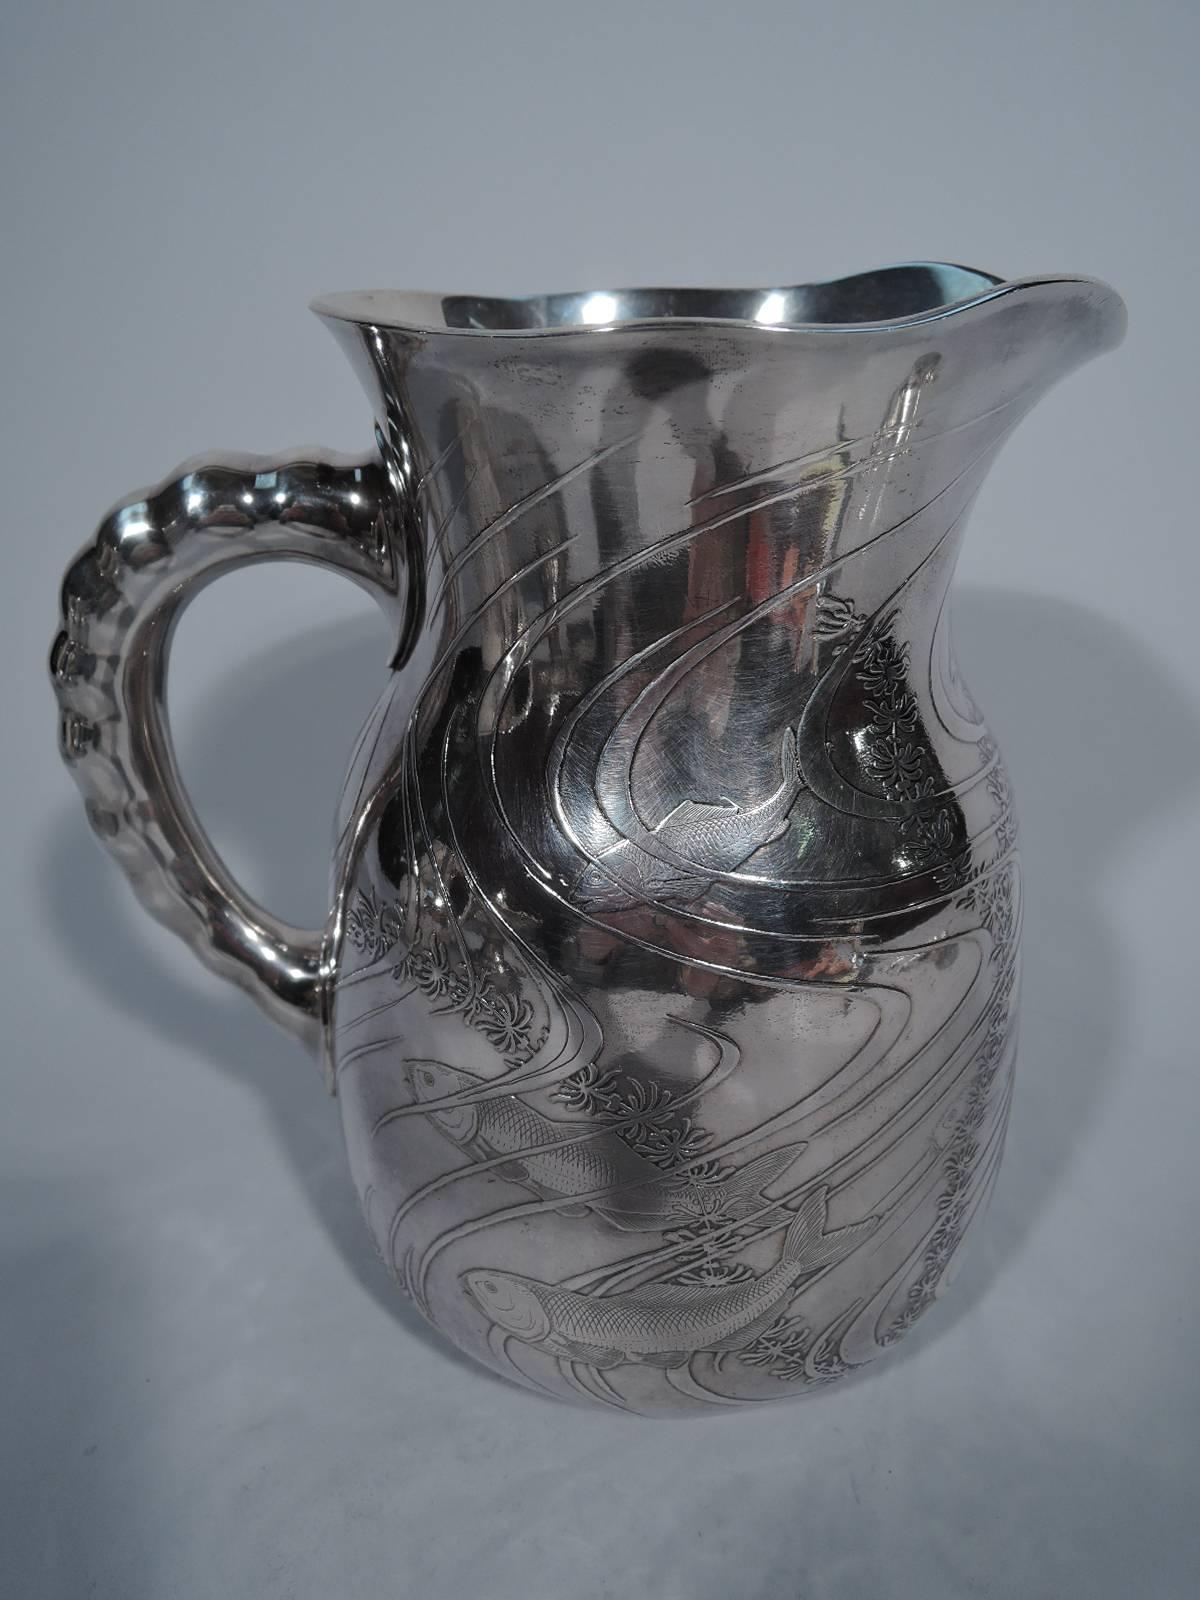 Japonesque sterling silver water pitcher. Made by Dominick & Haff in New York in 1887. Baluster body, undulating rim and C-scroll handle with soft graduated notches. Acid-etched aquatic scene with fish darting among the plants swaying in the